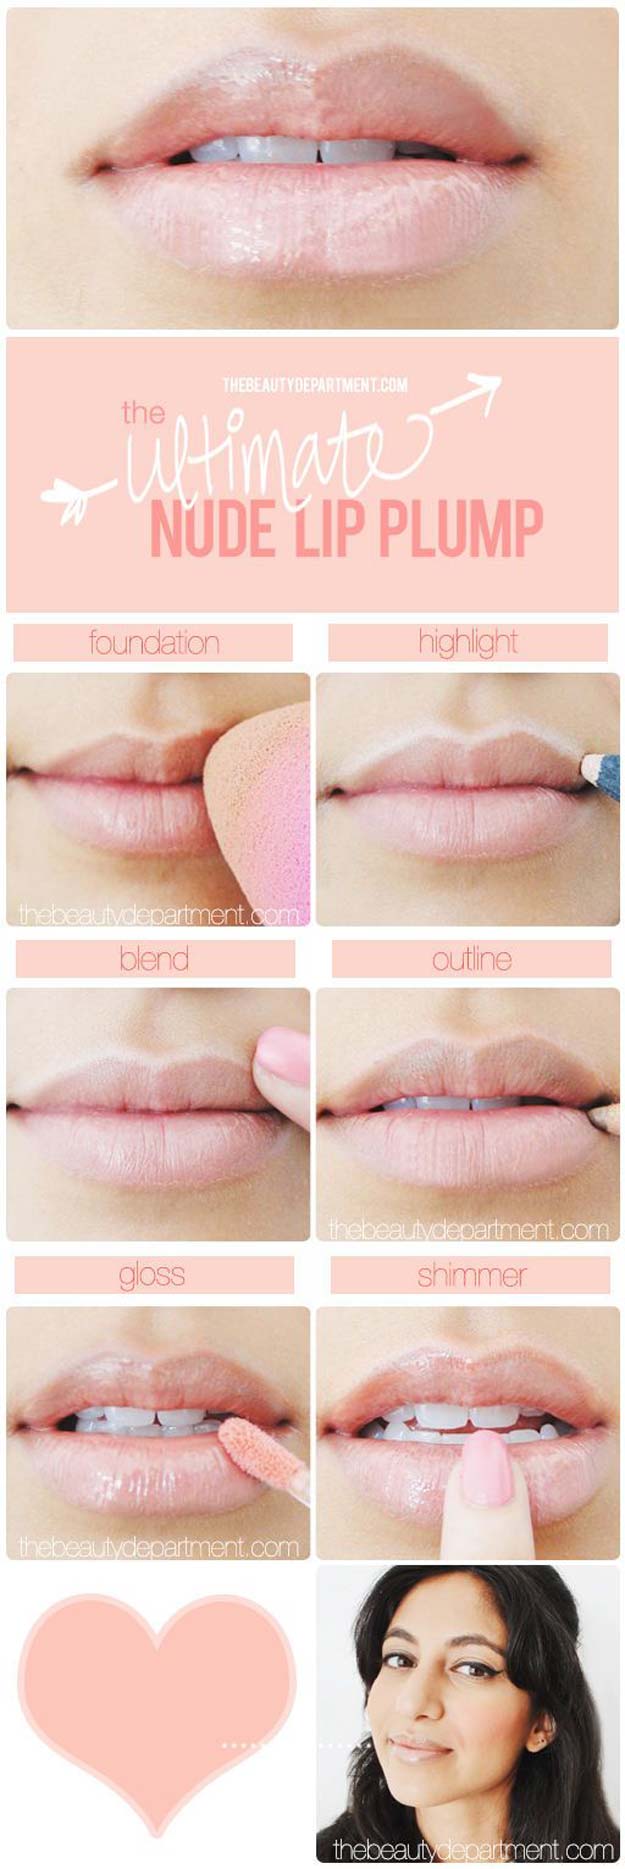 Lipstick Tutorials - Best Step by Step Makeup Tutorial How To - The Uptown Lip - Easy and Quick Ways to Apply Lipstick and Awesome Beauty Ideas - Cool Ideas for Teen Makeup for School, Party and Special Occasion - Makeup Tutorials for Beginners - Lip Liner Tips and Tricks to Add Volume, DIY Lip Techniques for Fuller Lips - DIY Projects and Crafts for Teens 